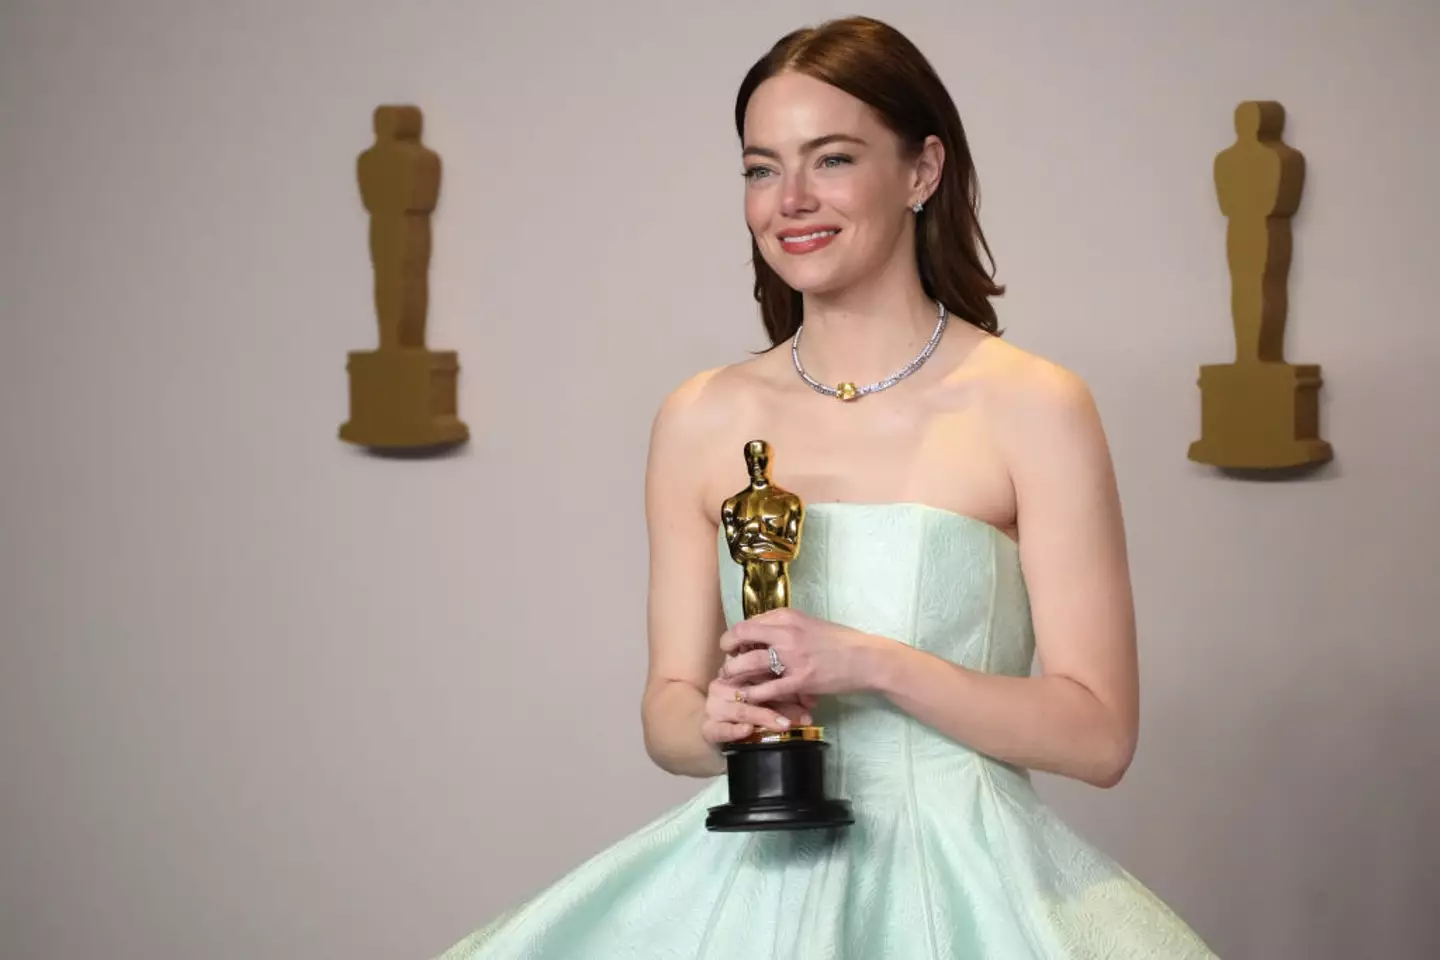 Emma Stone scooped the Best Actress award for her starring role in Poor Things.